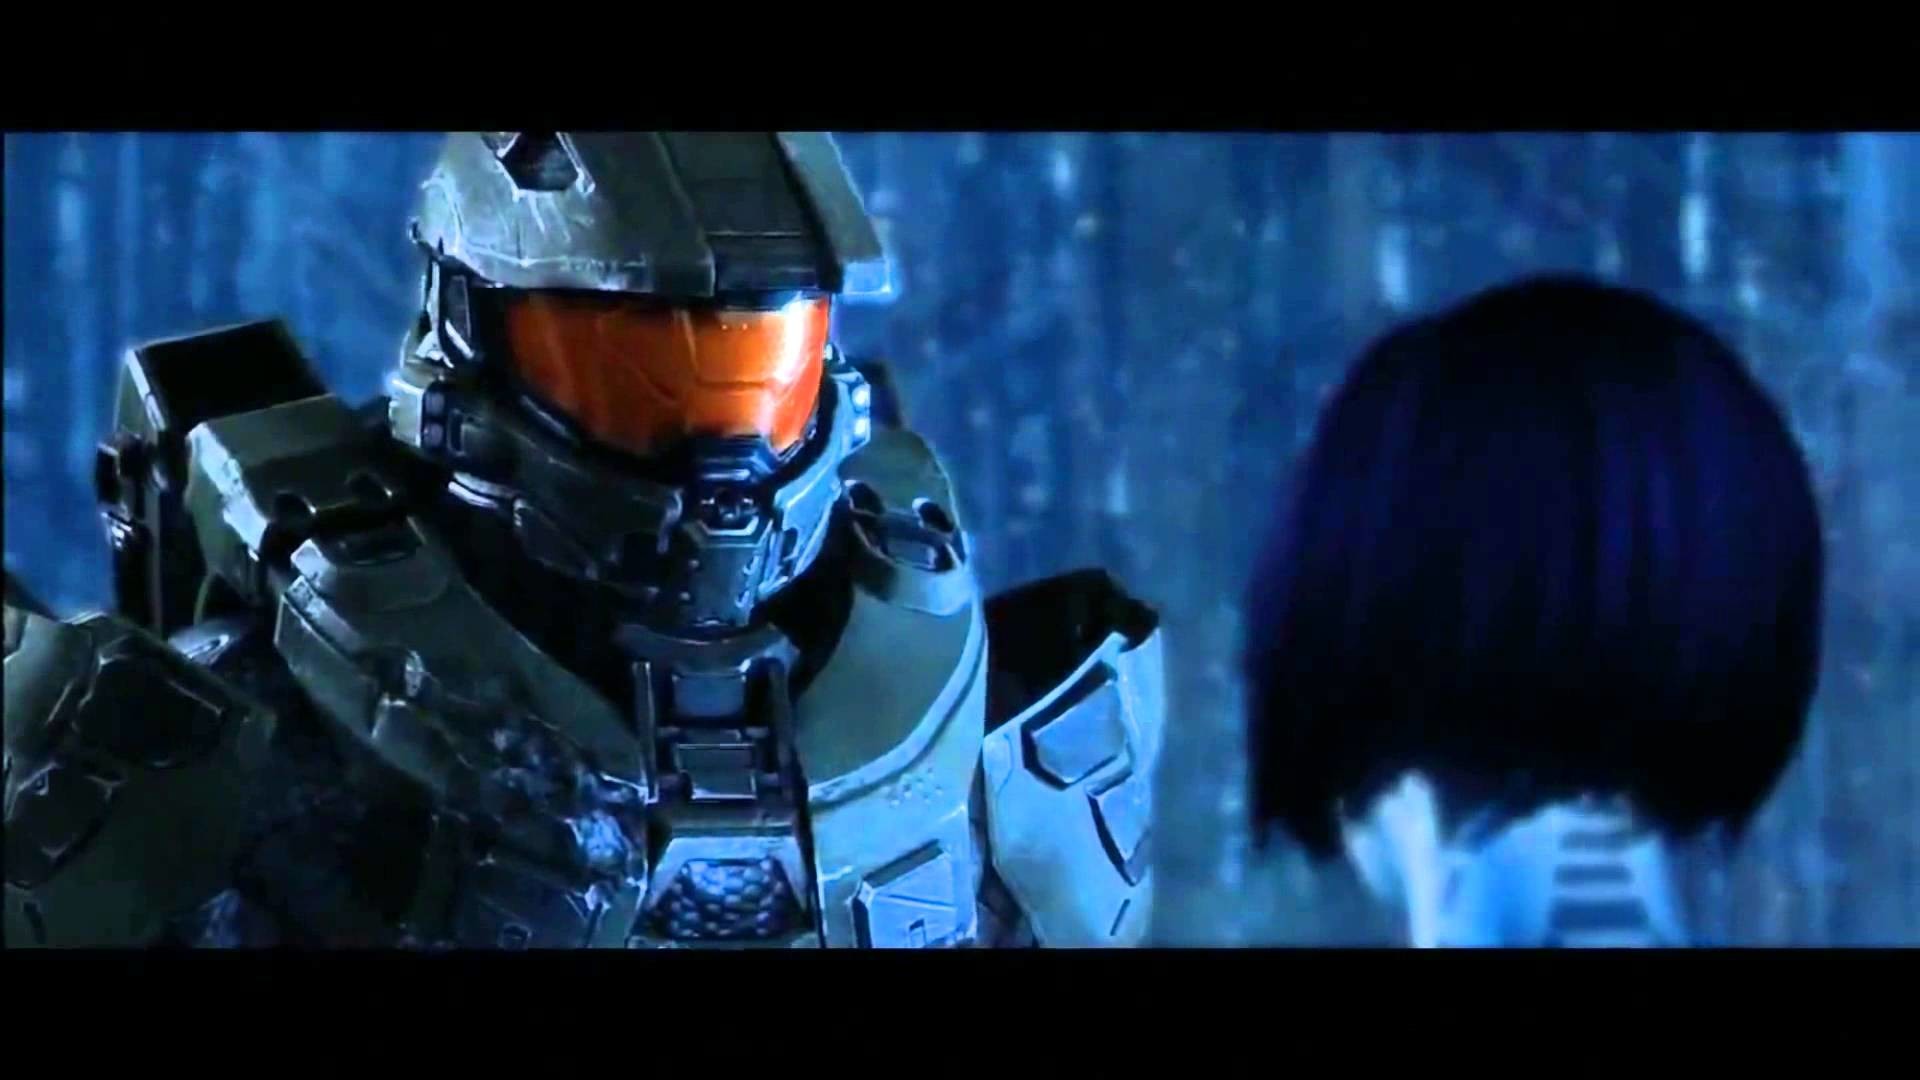 1920x1080 ... 12 best halo images on Pinterest | Videogames, Cortana halo and .